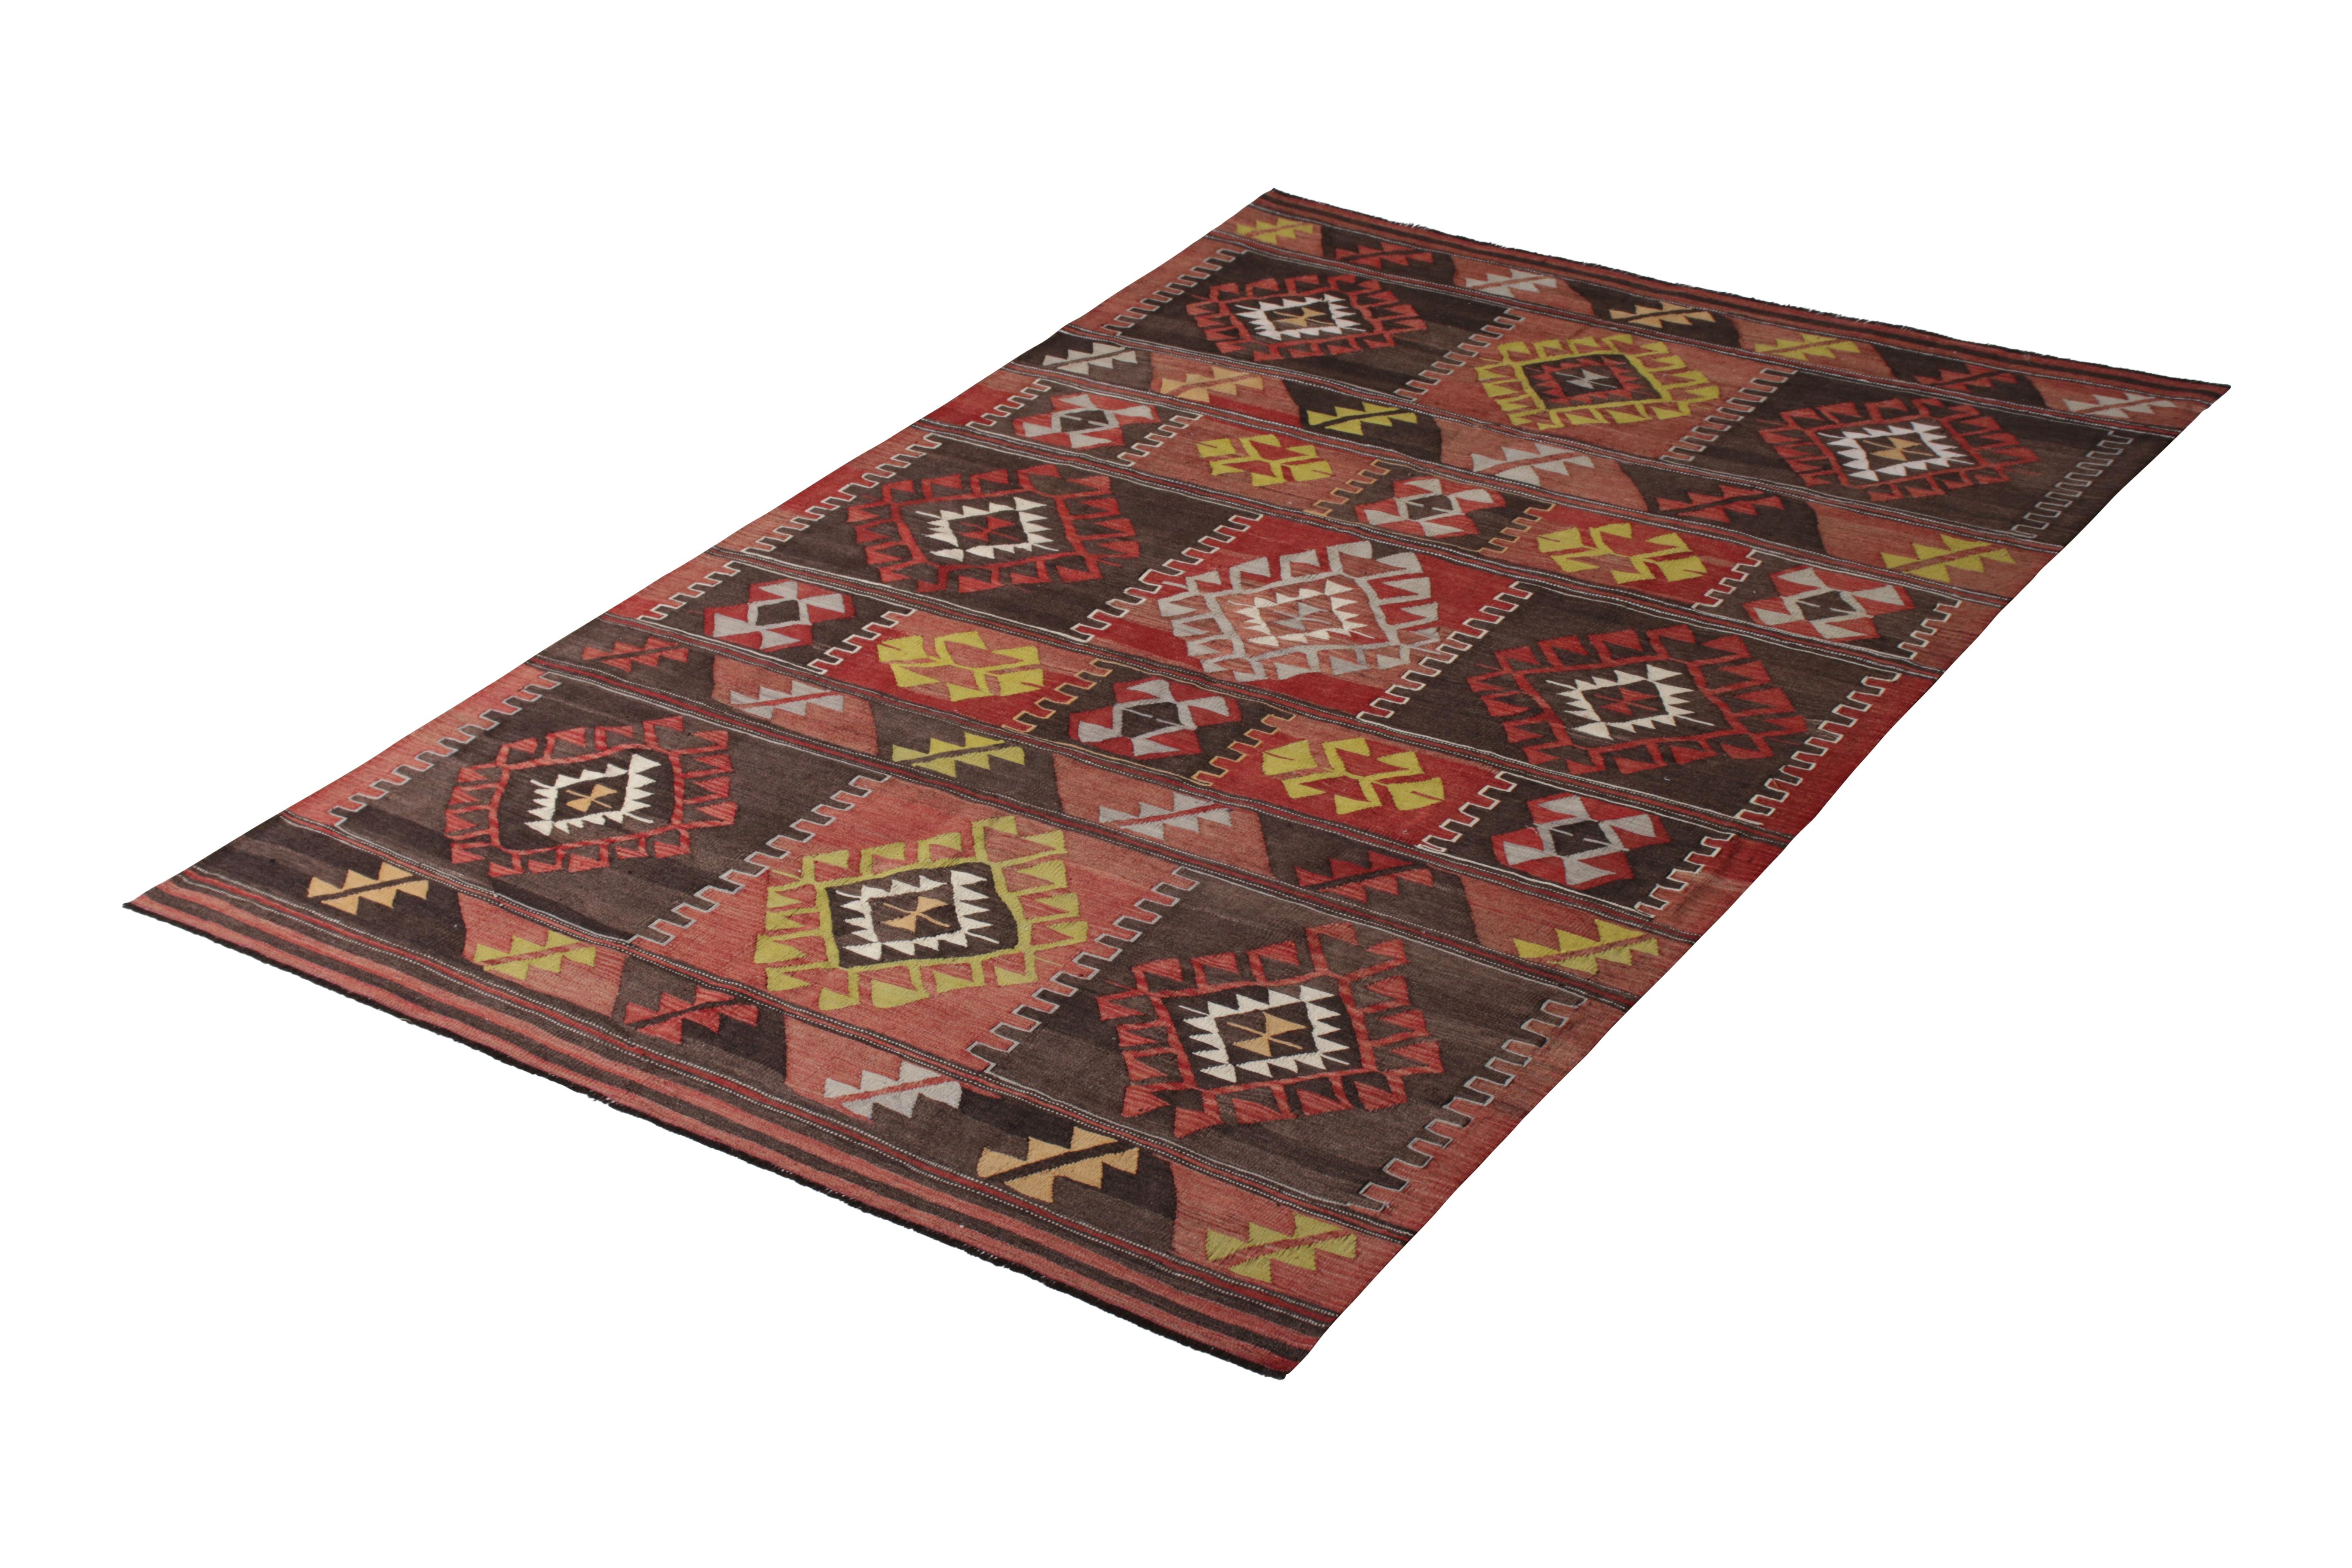 Handwoven in a wool flat weave originating from Turkey circa 1950-1960, this vintage Kilim rug connotes a midcentury tribal design of fabulous color, employing accents of blue and green against a background of red, brown, and pink hues both